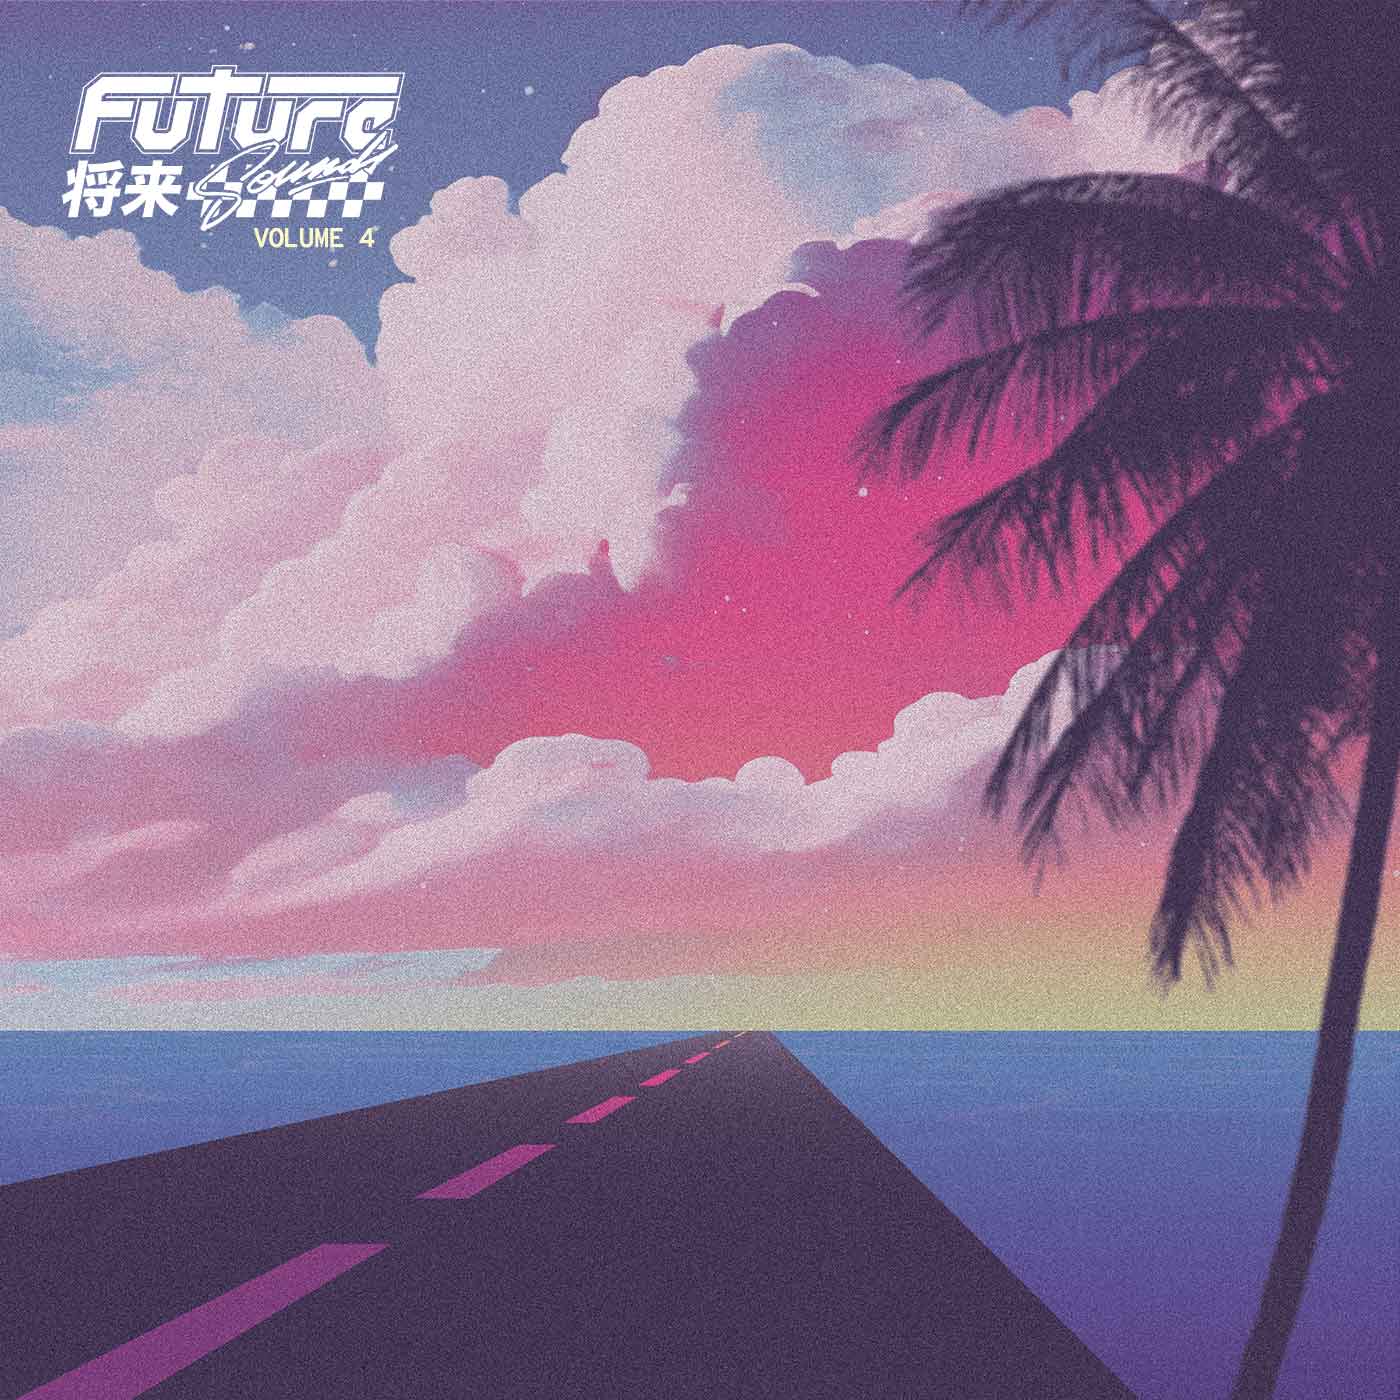 FutureSounds vol.4 – Everything you need to know about the biggest Synthwave compilation out there!